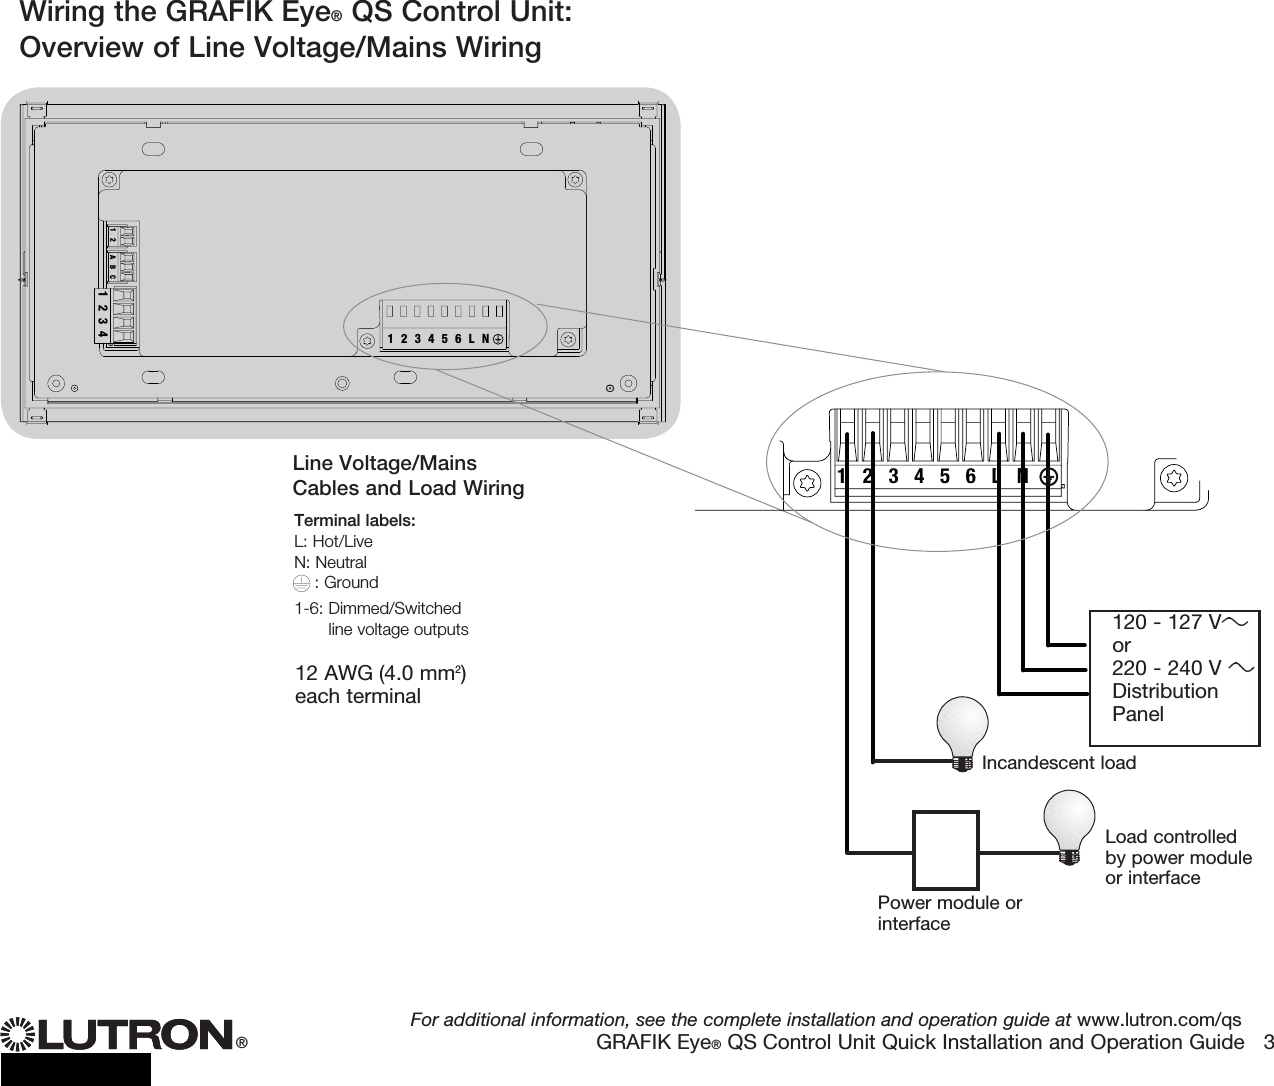 ®For additional information, see the complete installation and operation guide at www.lutron.com/qsGRAFIK Eye® QS Control Unit Quick Installation and Operation Guide   3Wiring the GRAFIK Eye® QS Control Unit:Overview of Line Voltage/Mains Wiring12341 2 ABC123456LN 12 AWG (4.0 mm2) each terminal120 - 127 Vor 220 - 240 V Distribution PanelLine Voltage/Mains Cables and Load Wiring123456LNIncandescent loadLoad controlled by power module or interfaceTerminal labels:L: Hot/LiveN: Neutral : Ground1-6:  Dimmed/Switched line voltage outputsPower module or interface